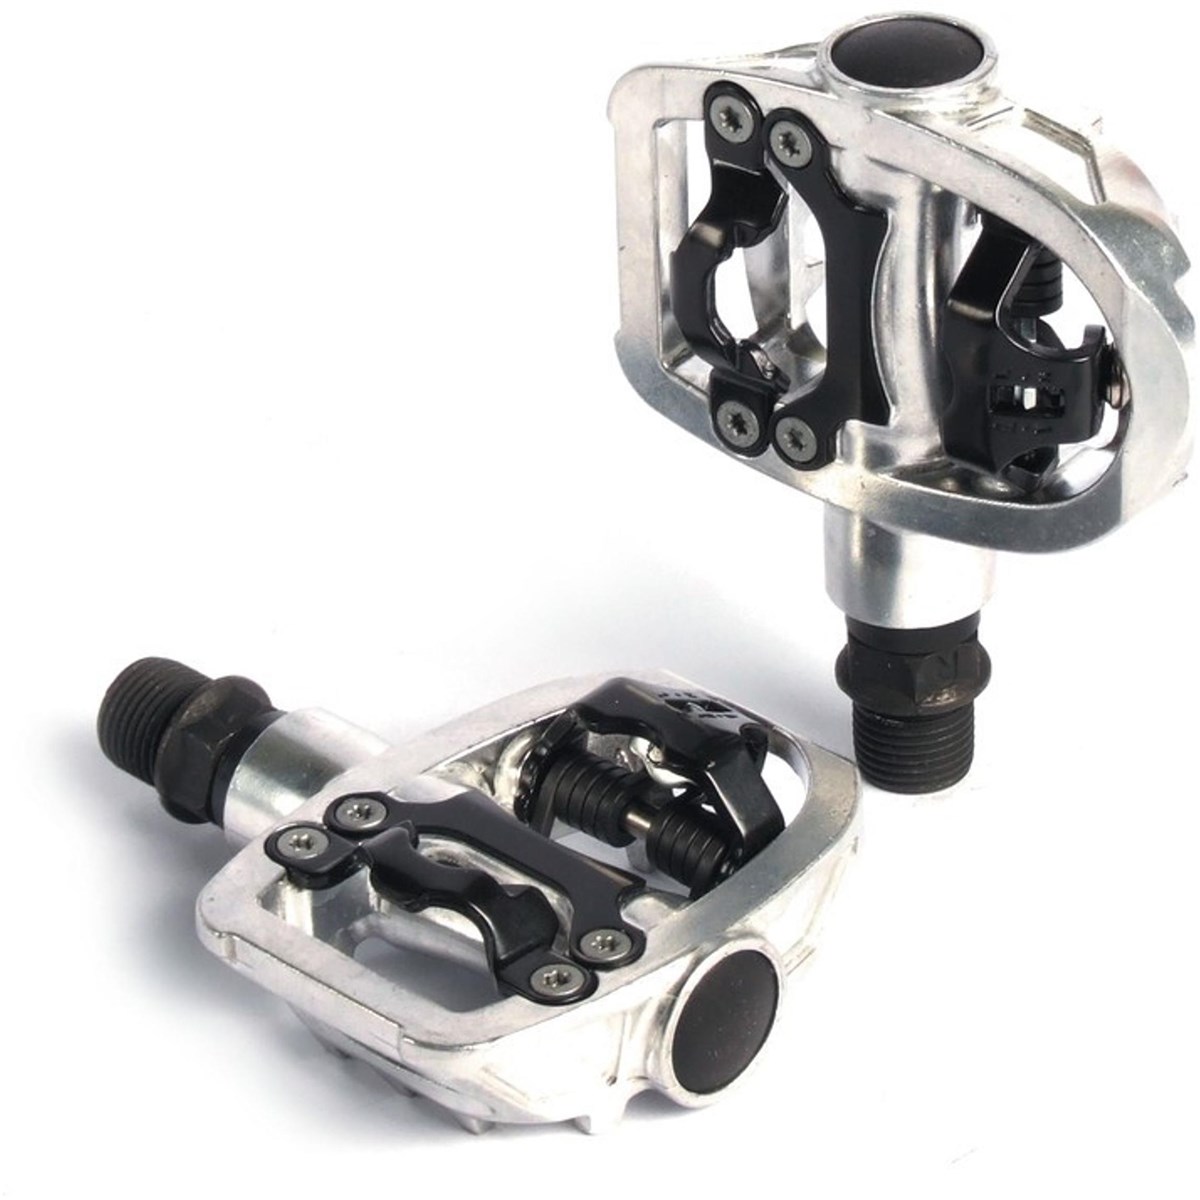 XLC Road SingleSided System Pedals (PD-S07) product image